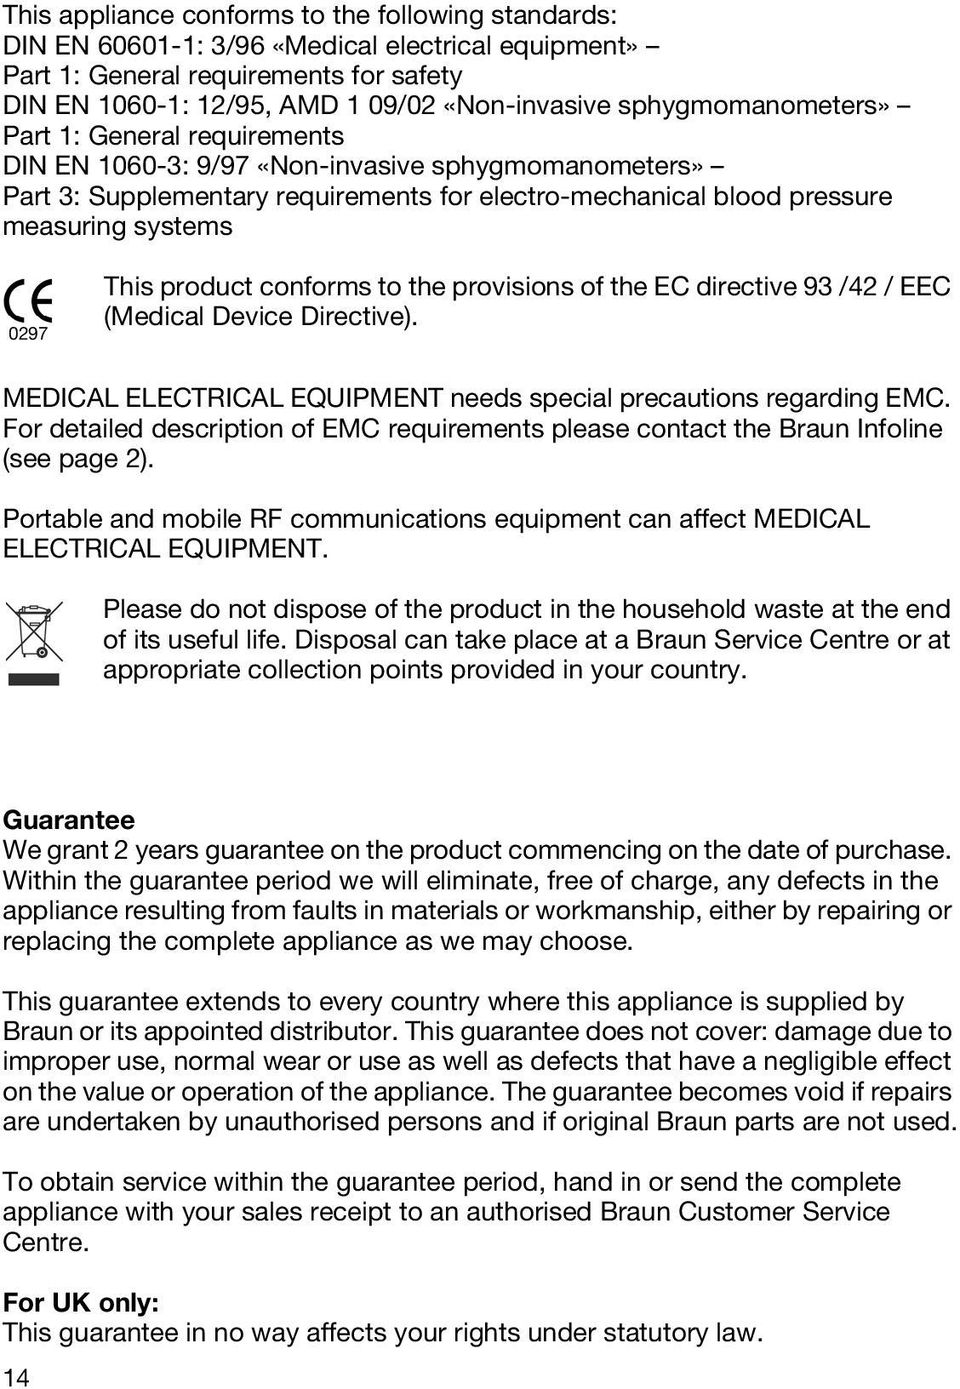 This product conforms to the provisions of the EC directive 93 /42 / EEC (Medical Device Directive). MEDICAL ELECTRICAL EQUIPMENT needs special precautions regarding EMC.